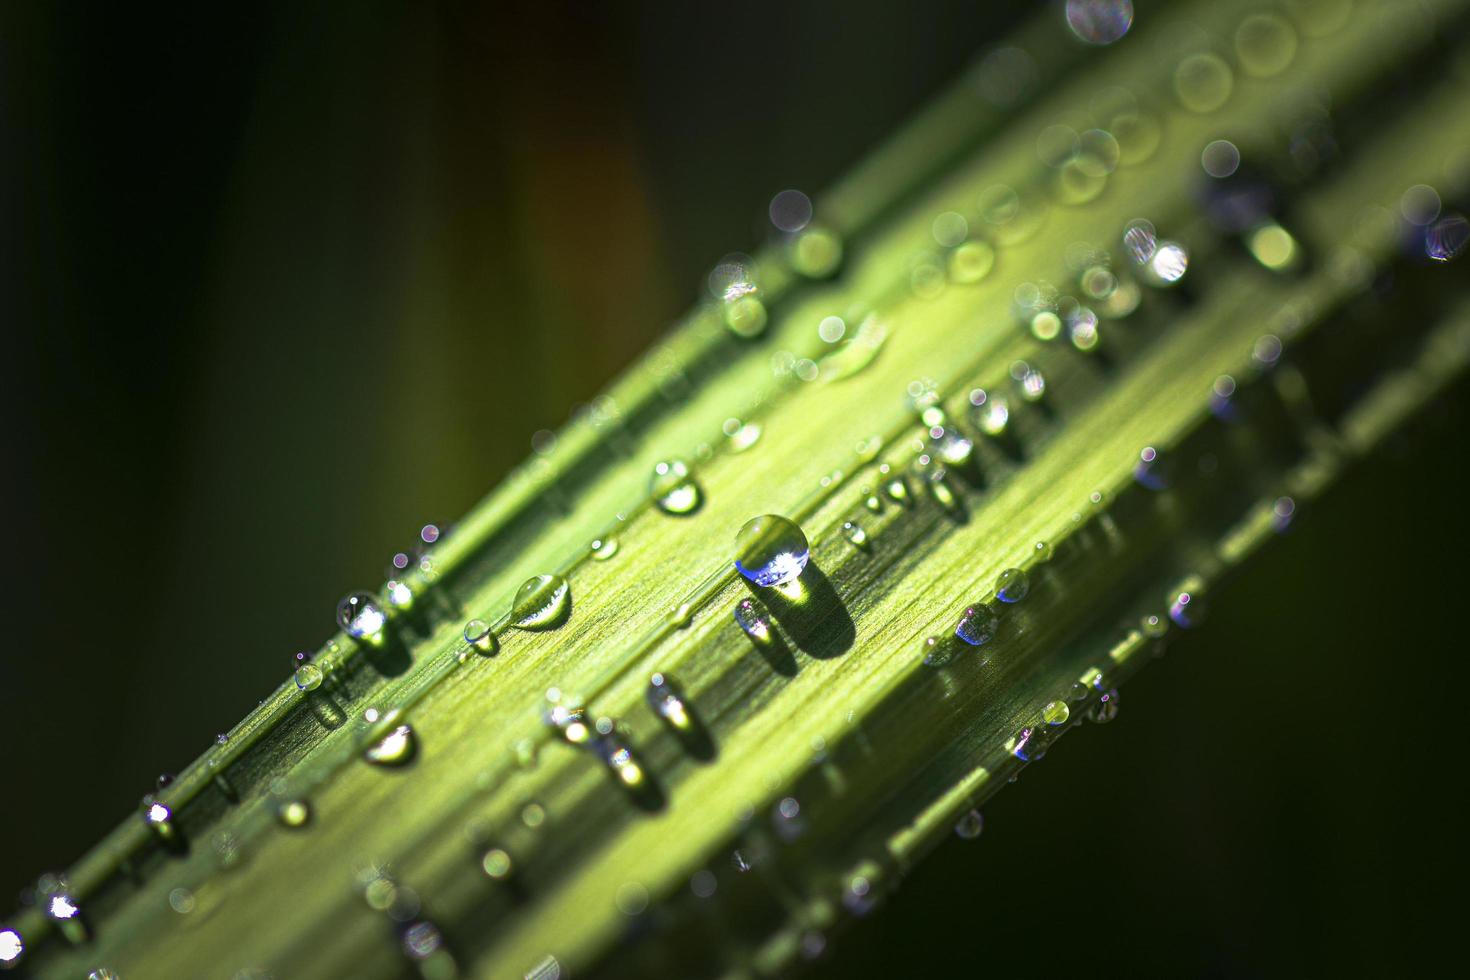 Dew drops on grass photo